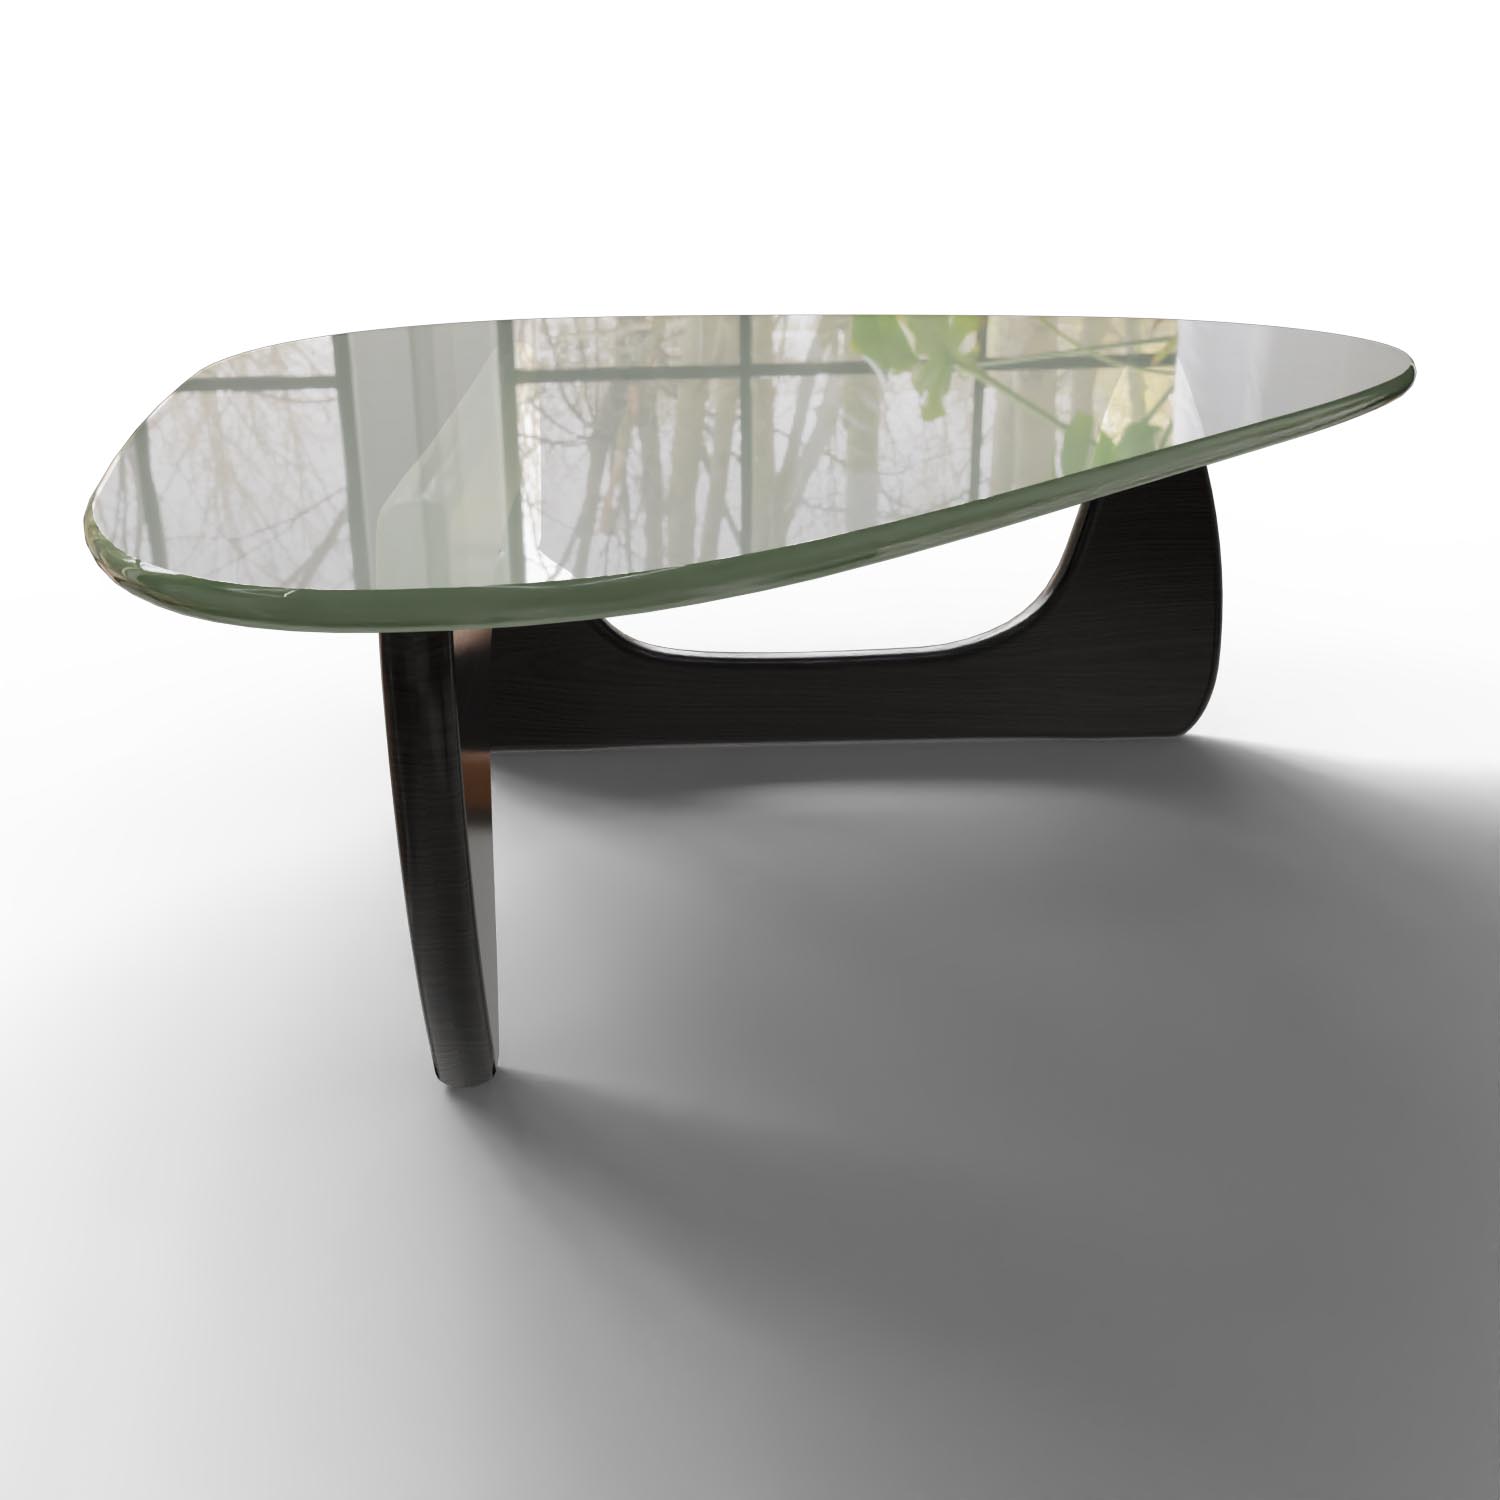 Tisch Coffee Table 20130001